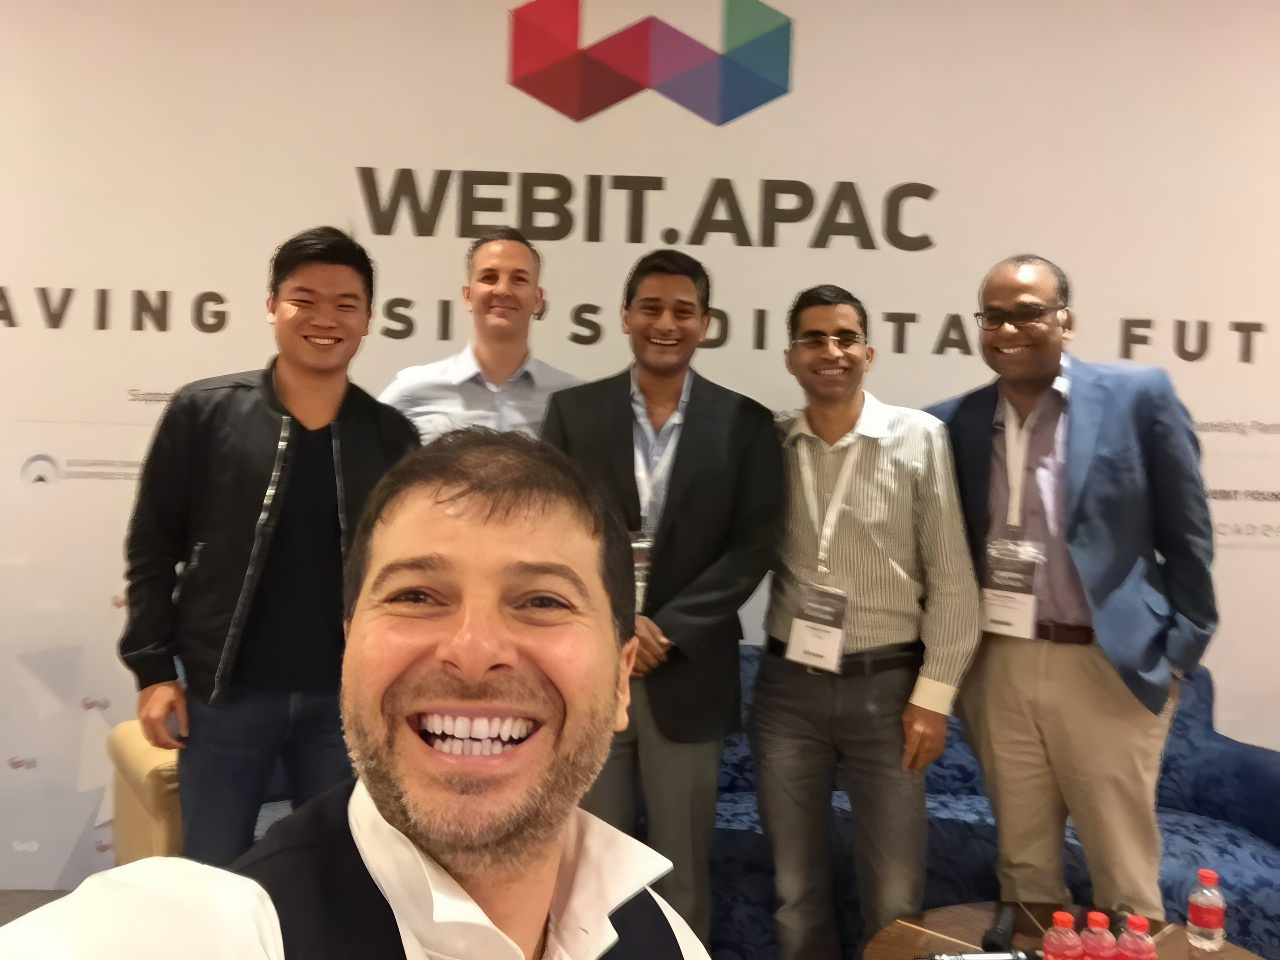 Plamen Russev with select speakers and partners of Webit.APAC in Singapore